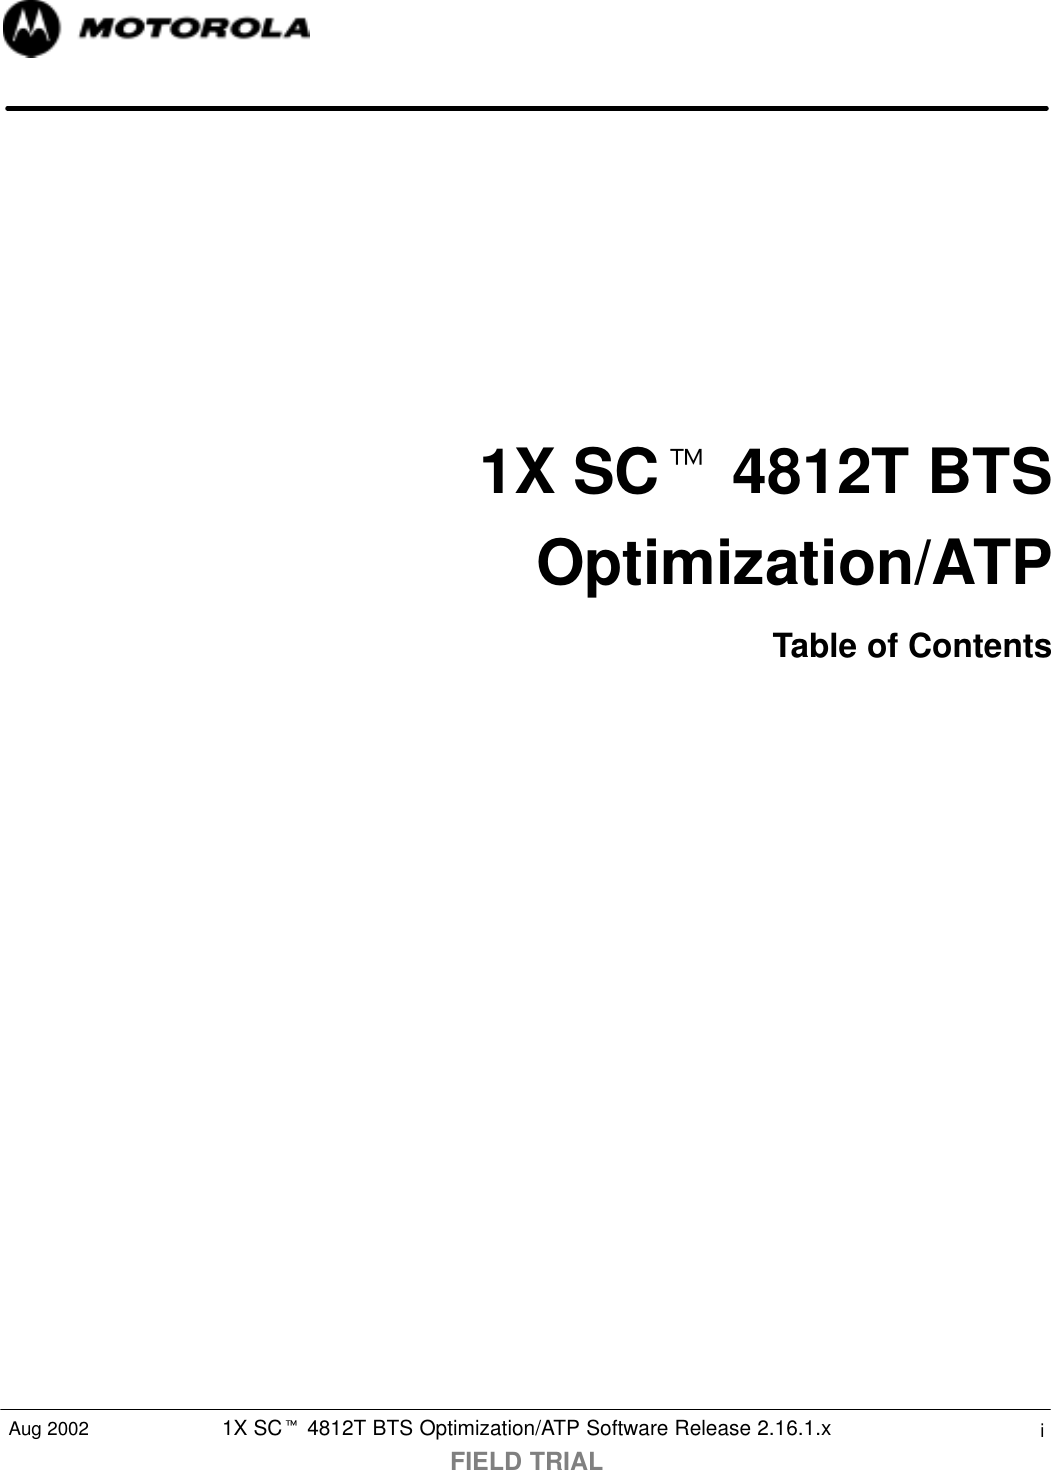 1X SCt 4812T BTS Optimization/ATP Software Release 2.16.1.xFIELD TRIALiAug 20021X SCt 4812T BTSOptimization/ATPTable of Contents...